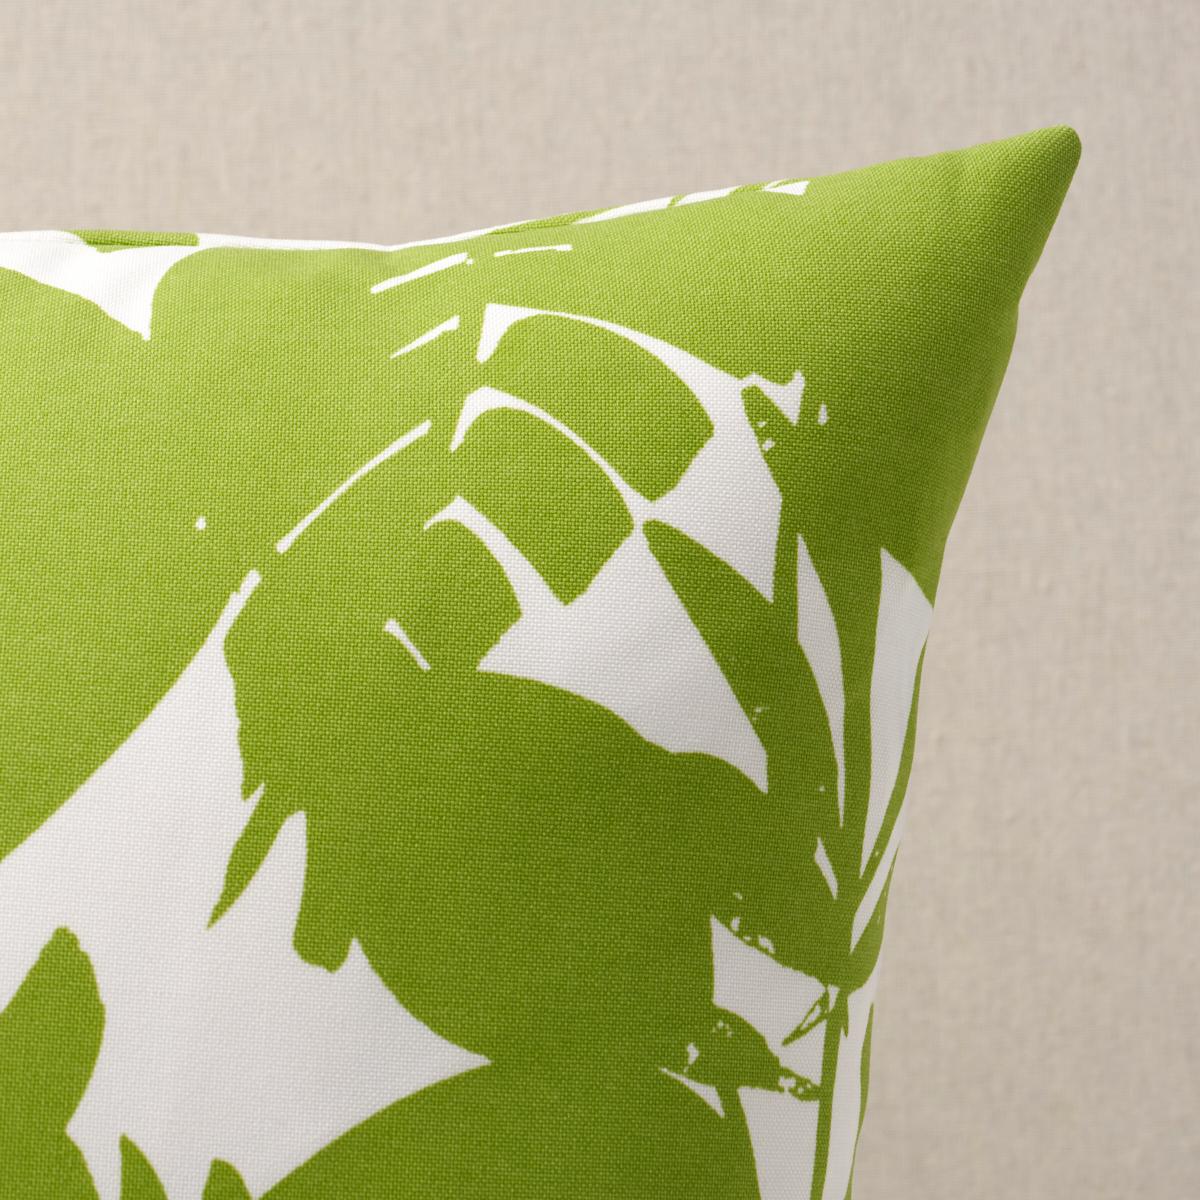 This pillow features Palisades Palm Print Indoor/Outdoor by Trina Turk with a knife edge finish. Featuring graphic silhouettes of tropical fronds, Palisades Palm Print Indoor/Outdoor fabric is a dense allover design by Trina Turk. Pillow includes a